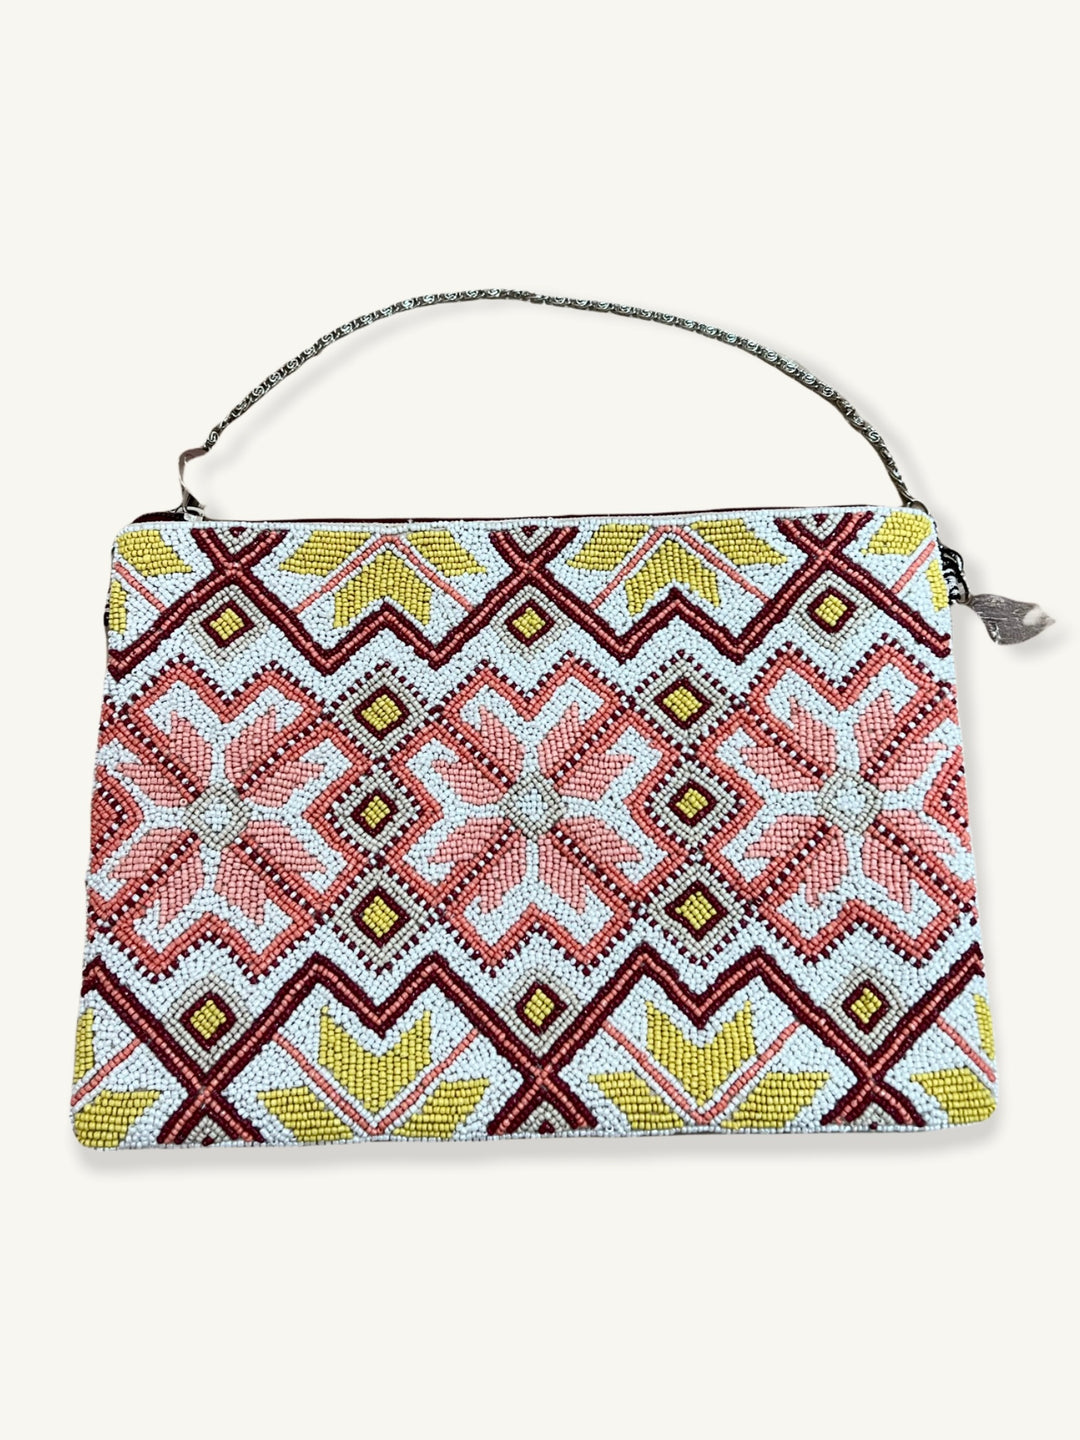 FAIR ISLE EMBELLISHED CLUTCH - Kingfisher Road - Online Boutique